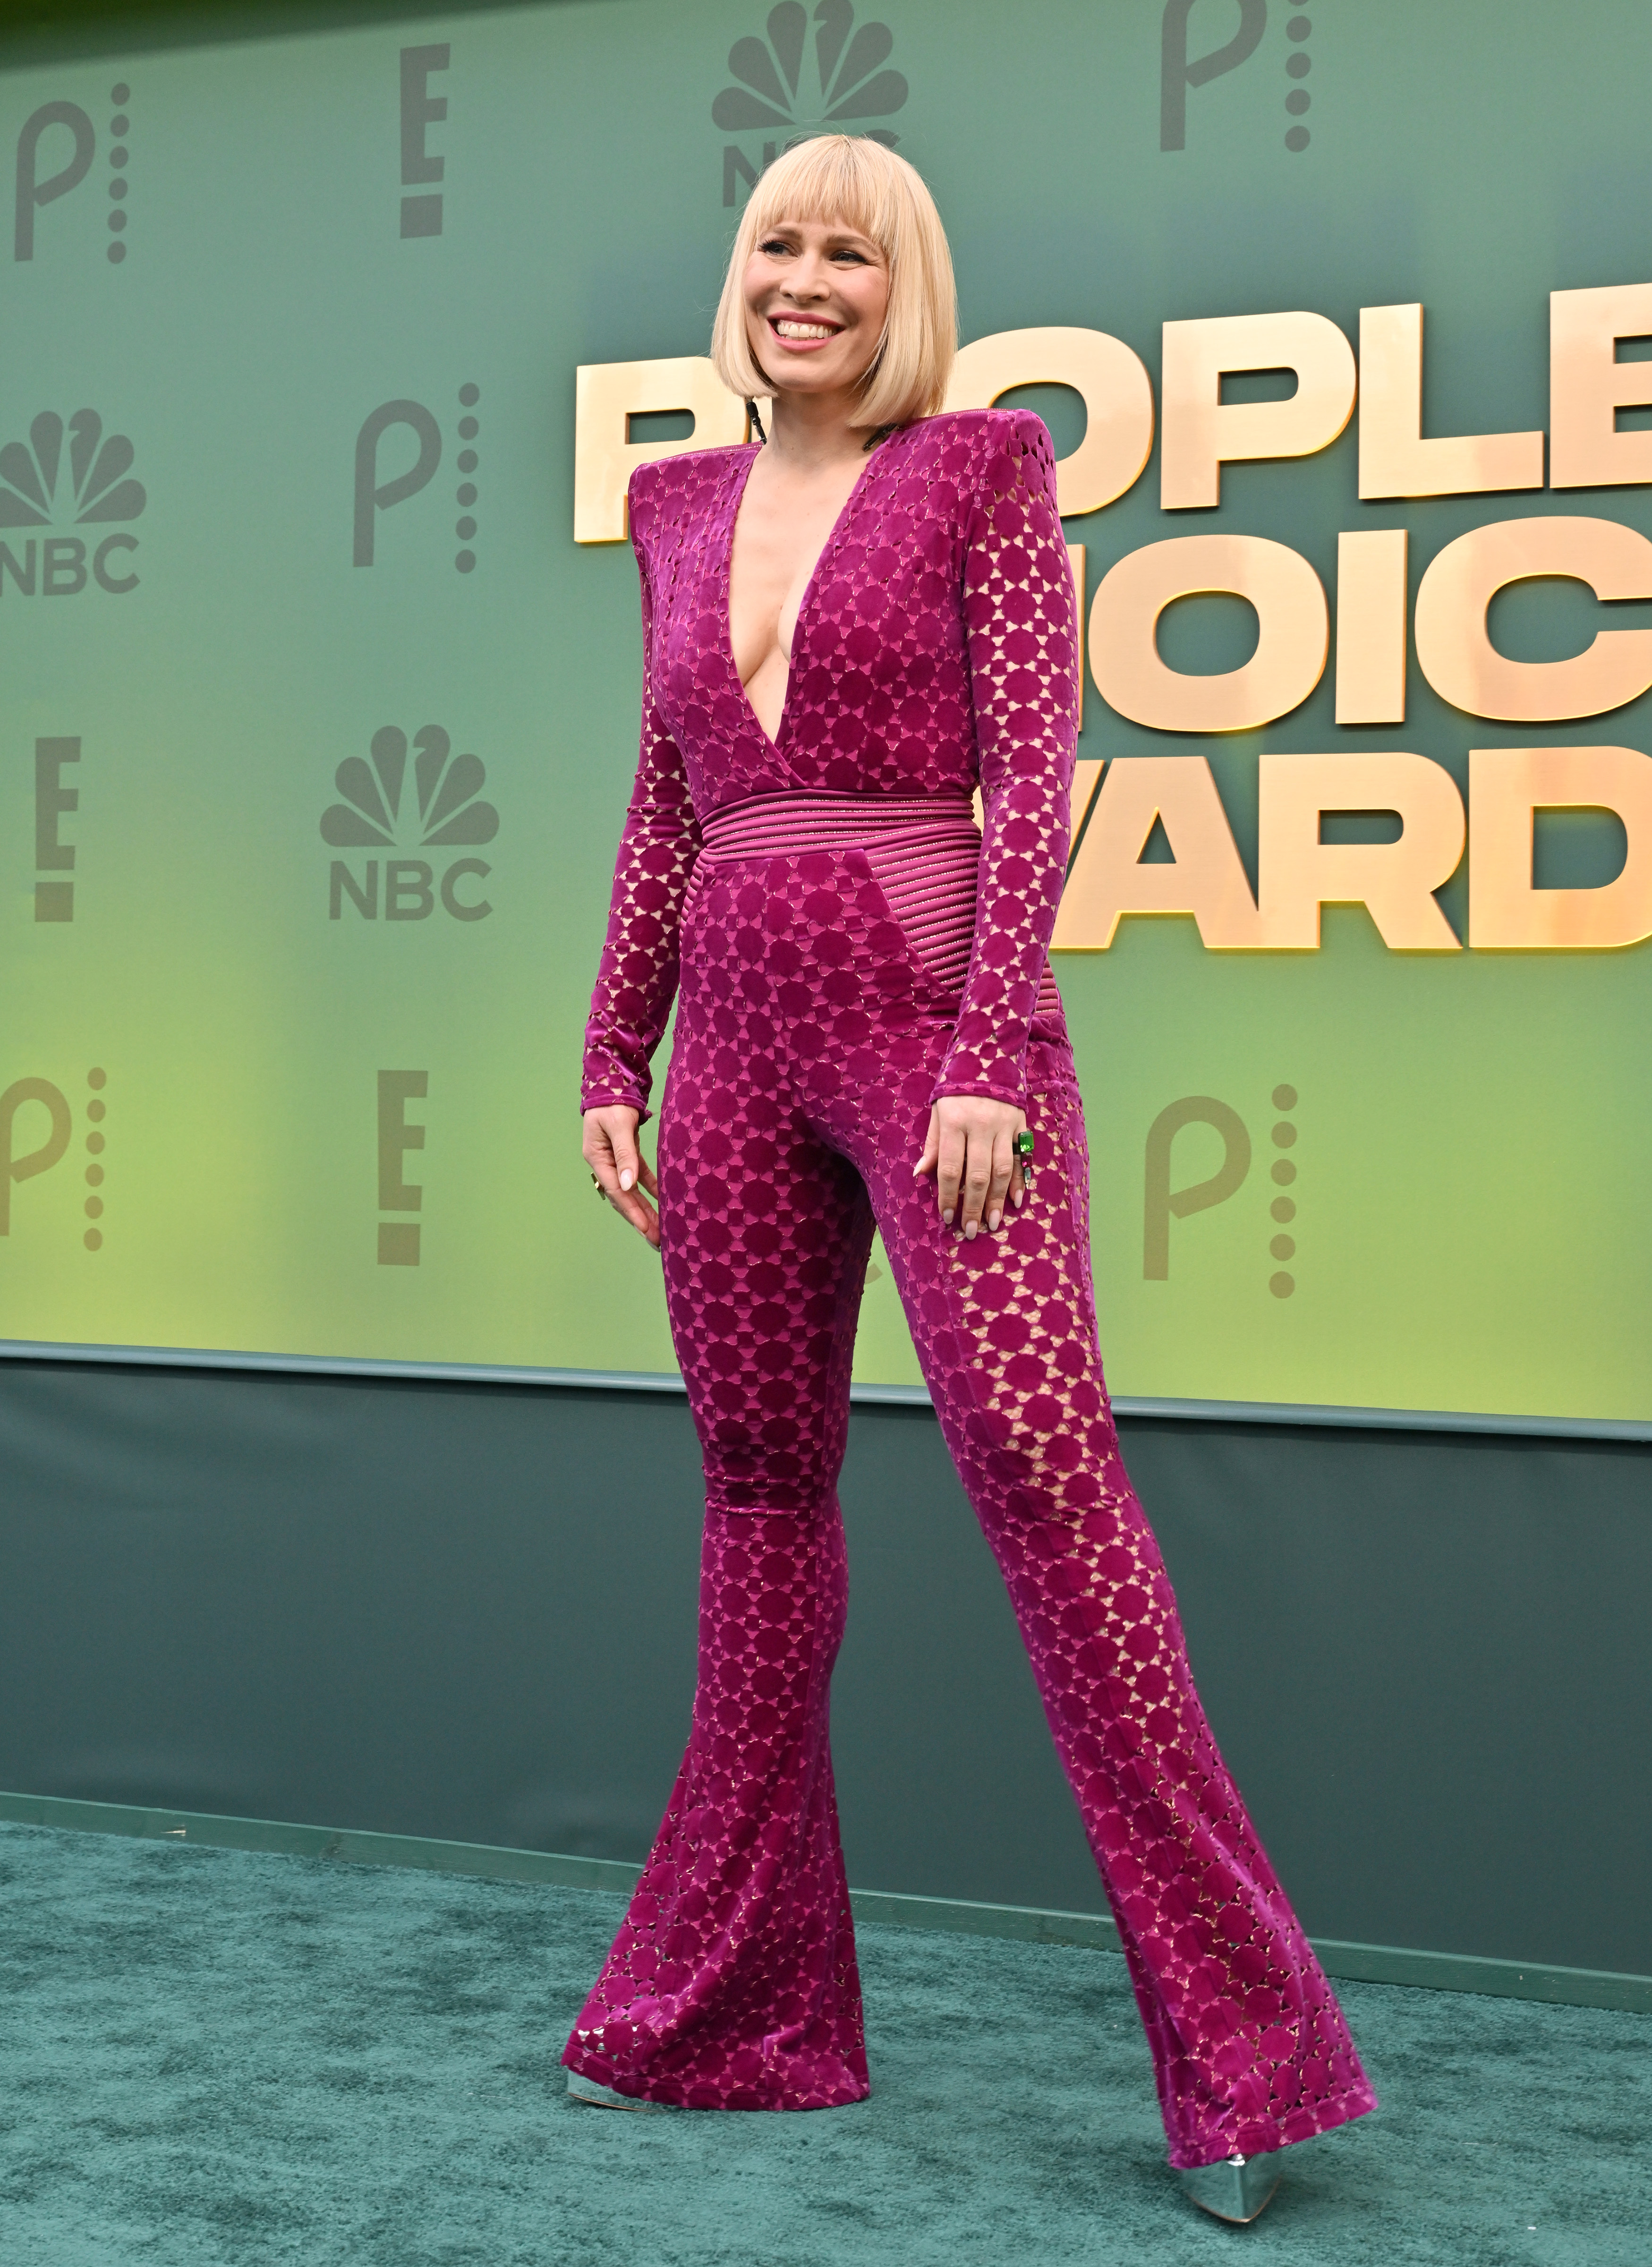 The singer attended the People's Choice Awards